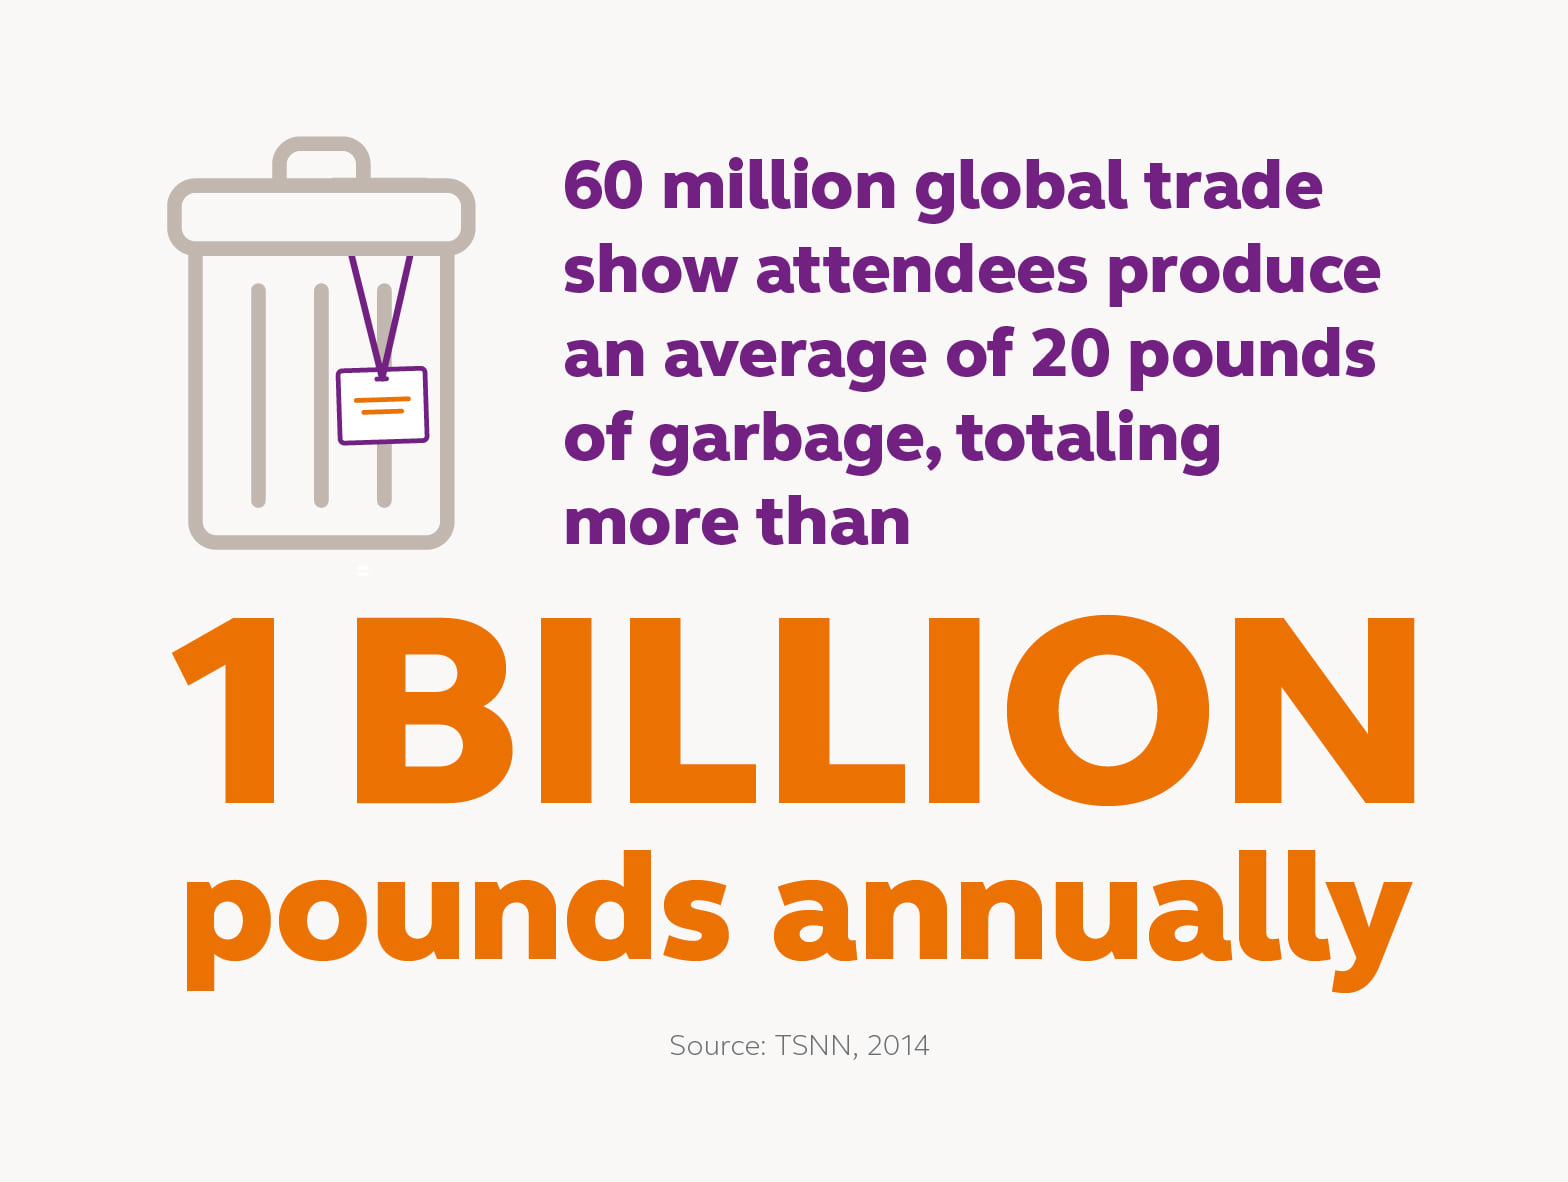 global trade show attendees produce 1 billion pounds of garbage annually